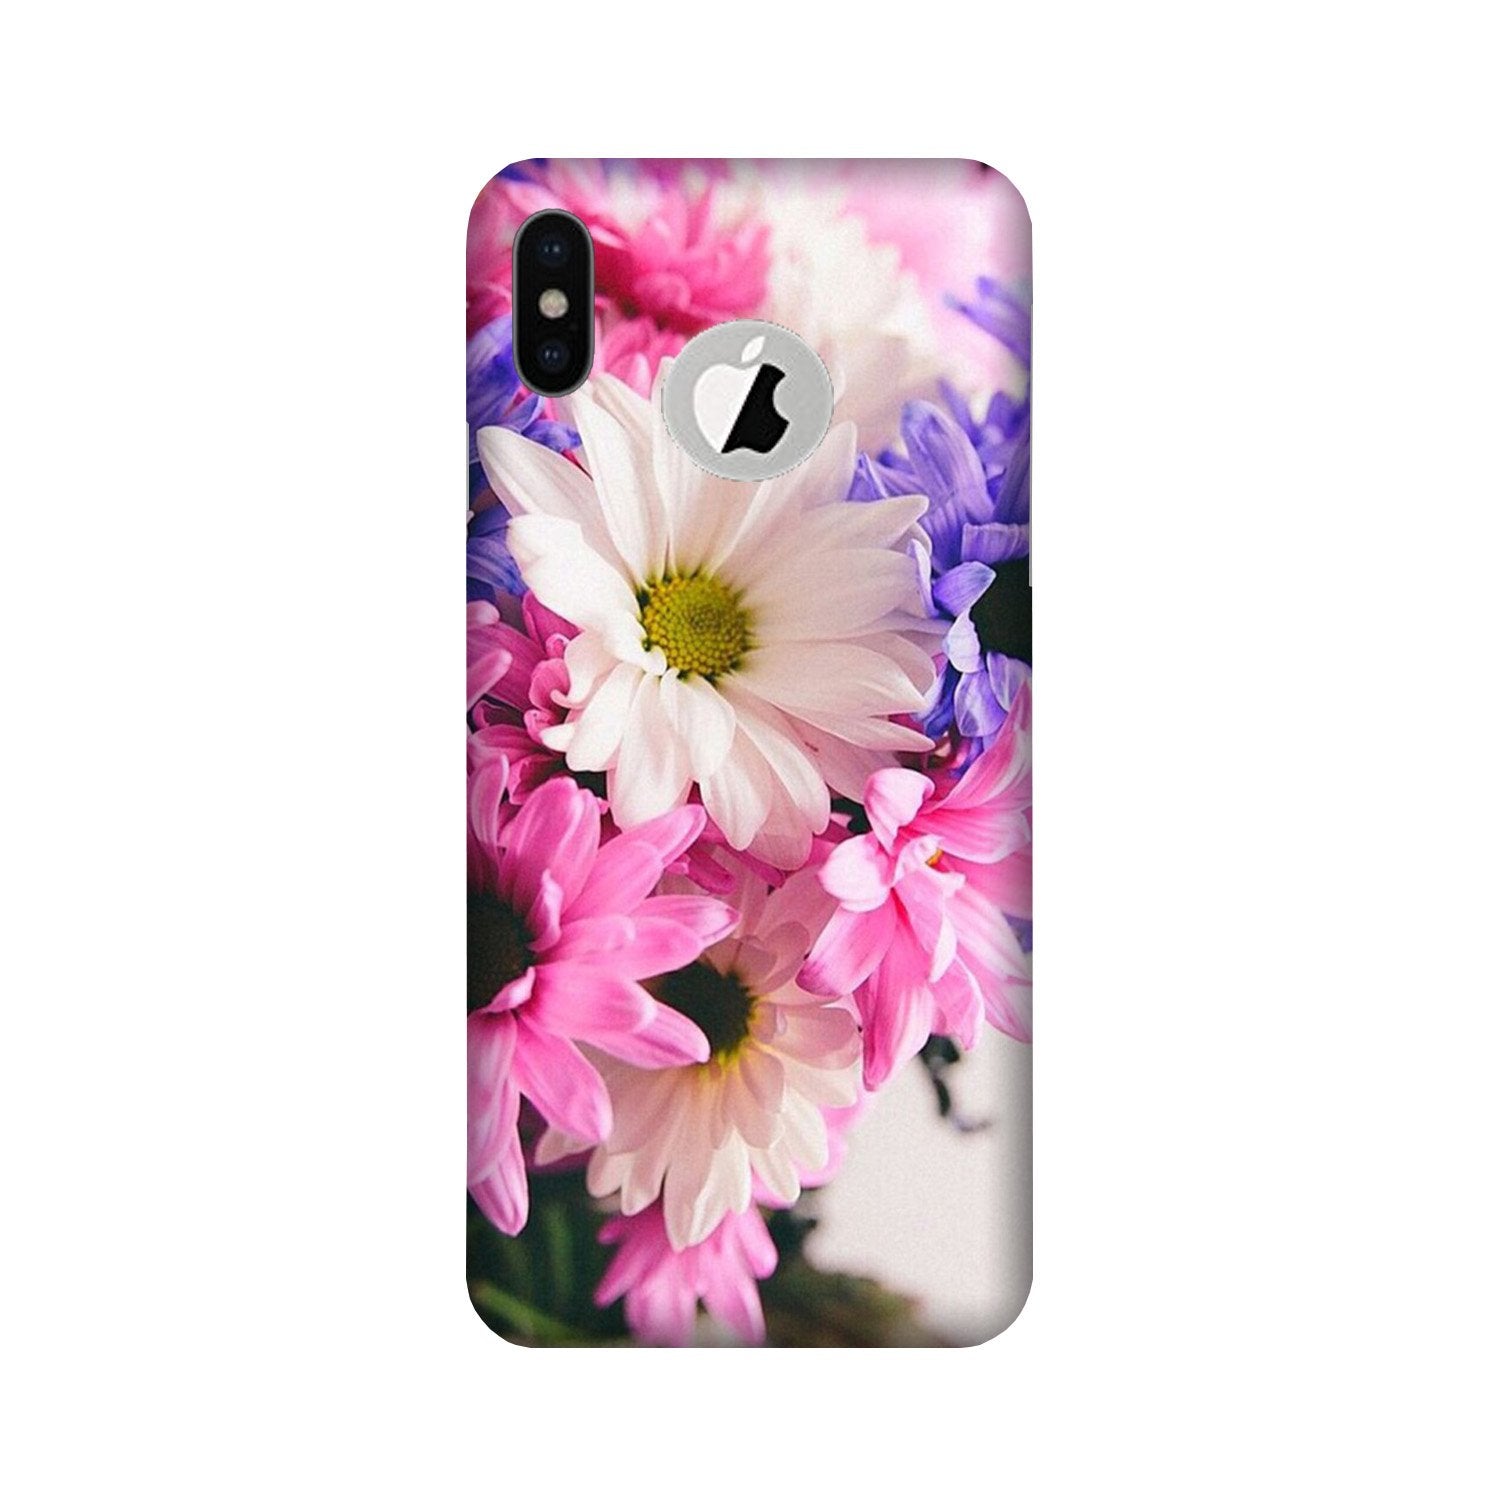 Coloful Daisy Case for iPhone Xs logo cut 